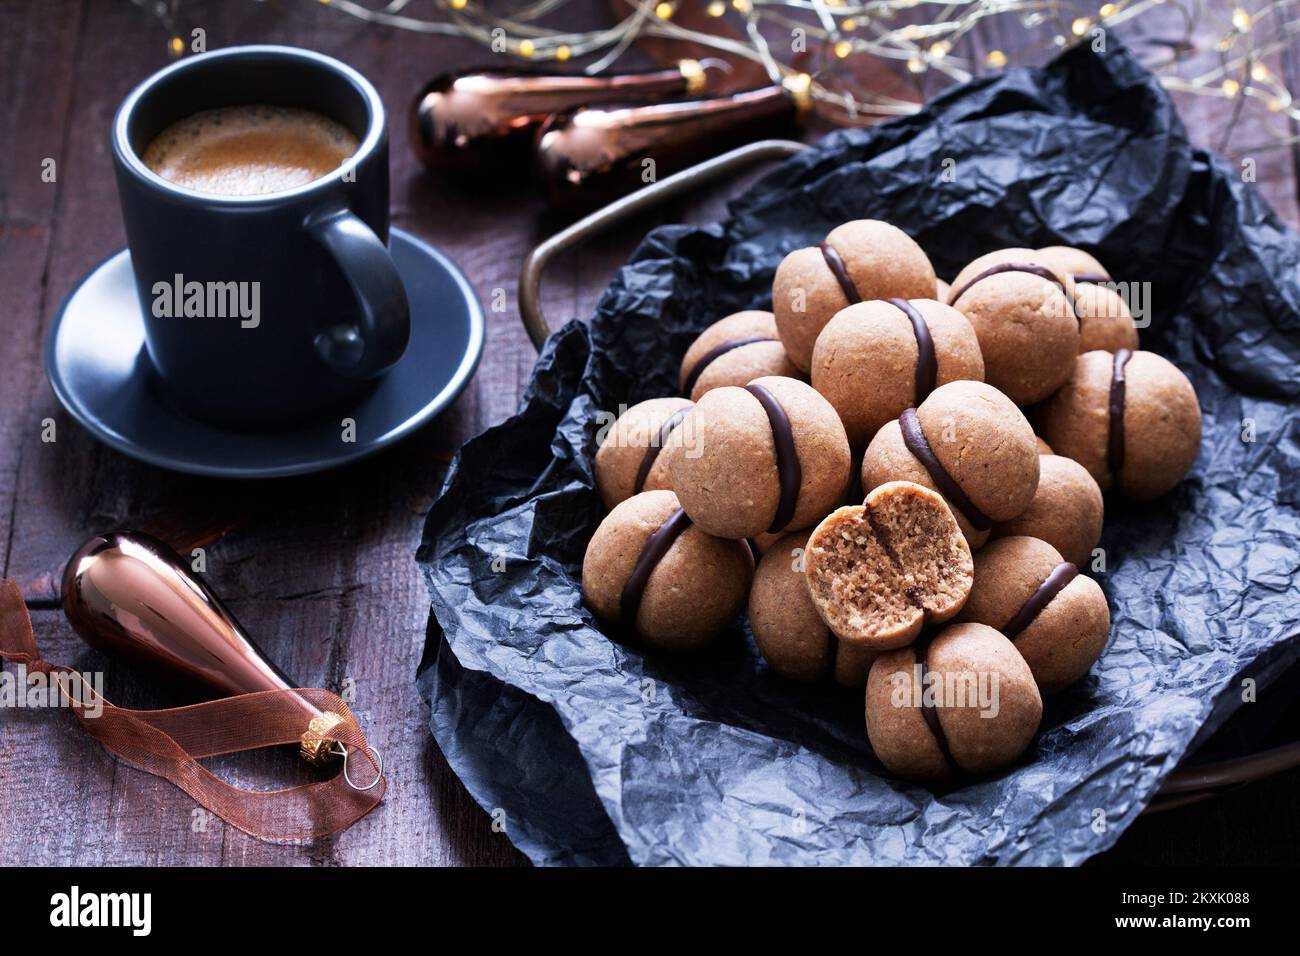 Lady's kisses, traditional Italian nut cookies with coffee and chocolate filling. Stock Photo